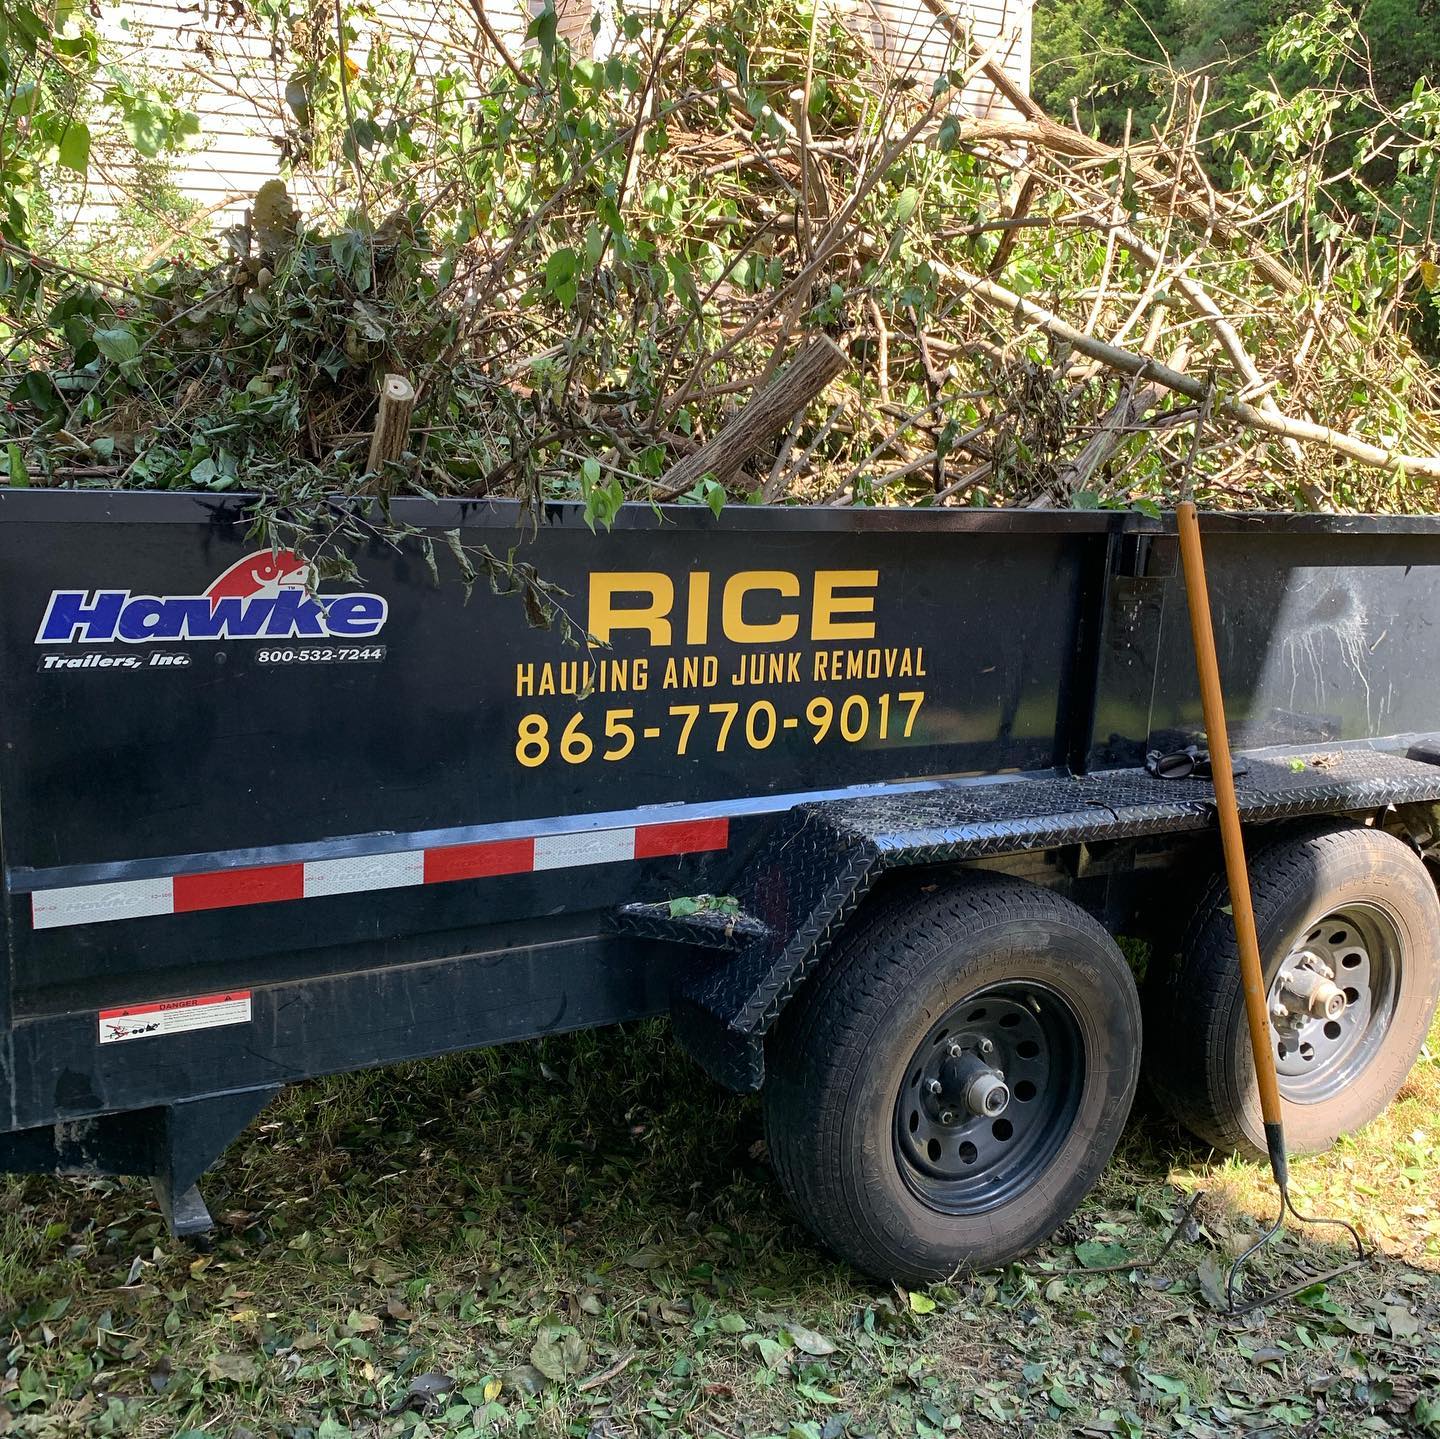 Rice Hauling and Junk Removal LLC